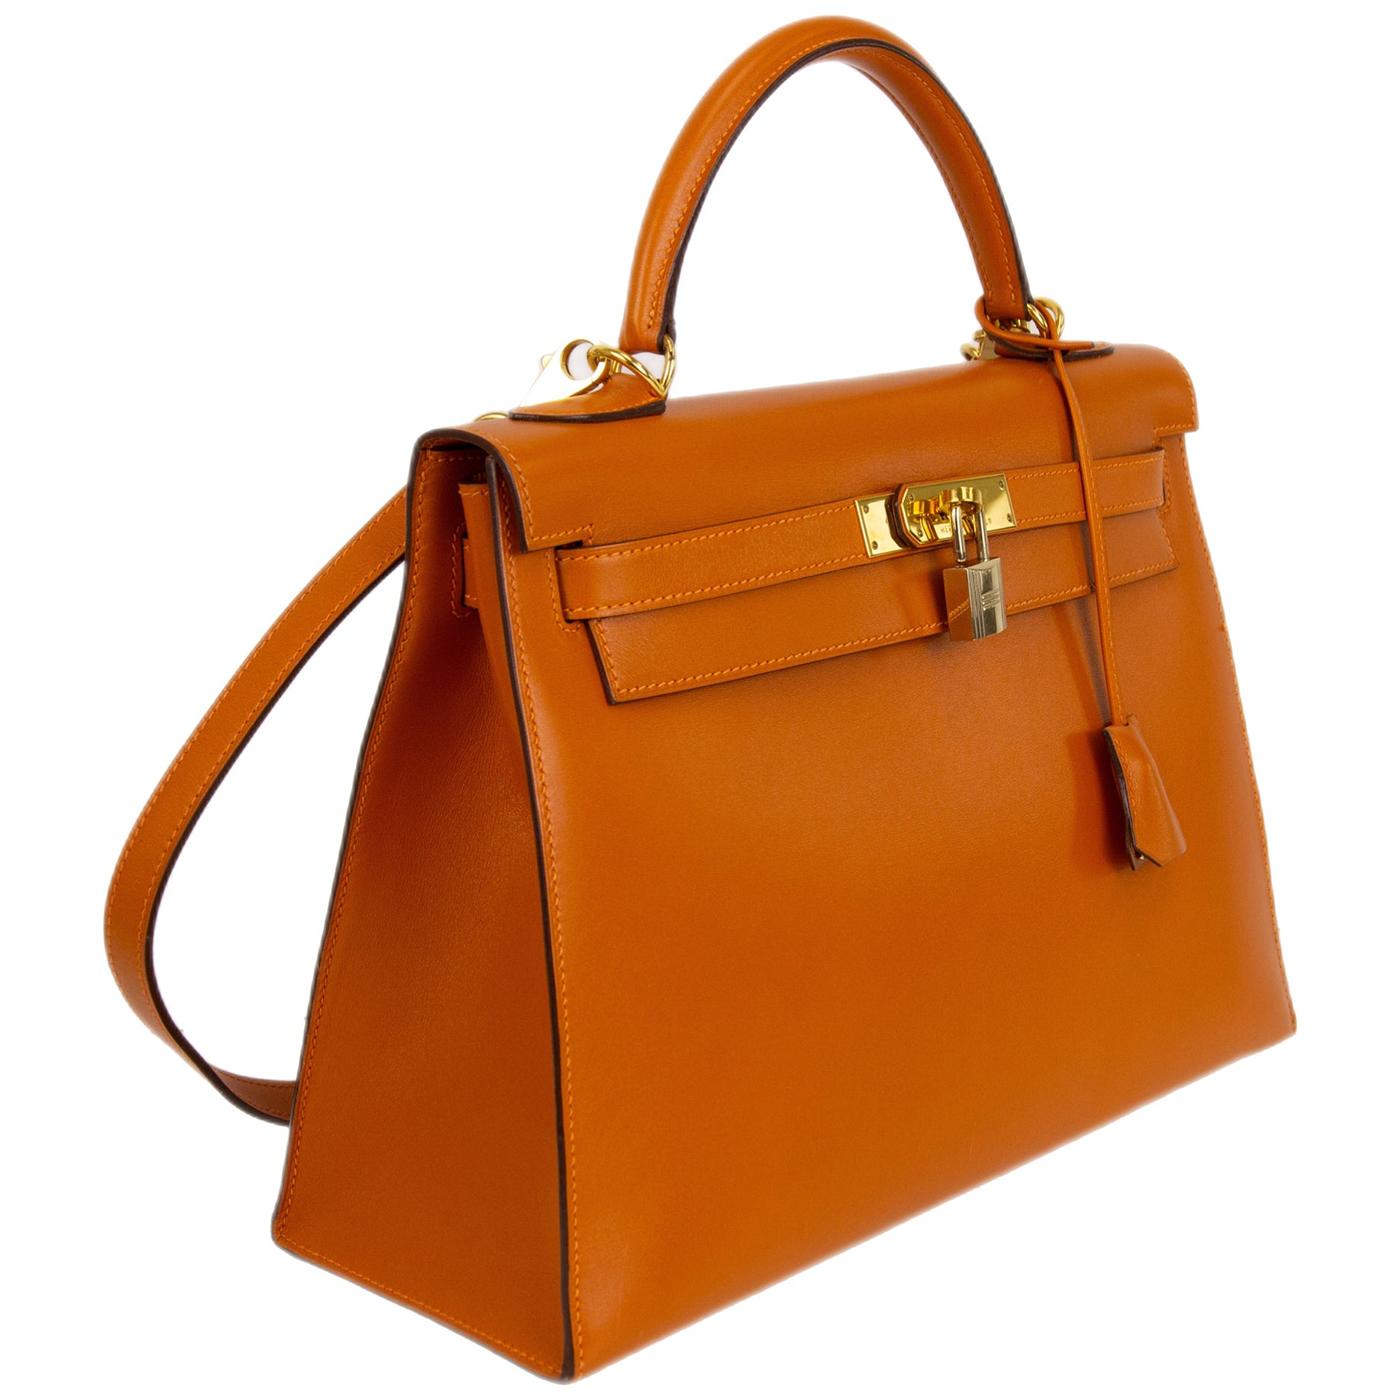 Hermes Kelly Sellier 32 Handbag Potiron with Gold Hardware In Excellent Condition For Sale In Aventura, FL